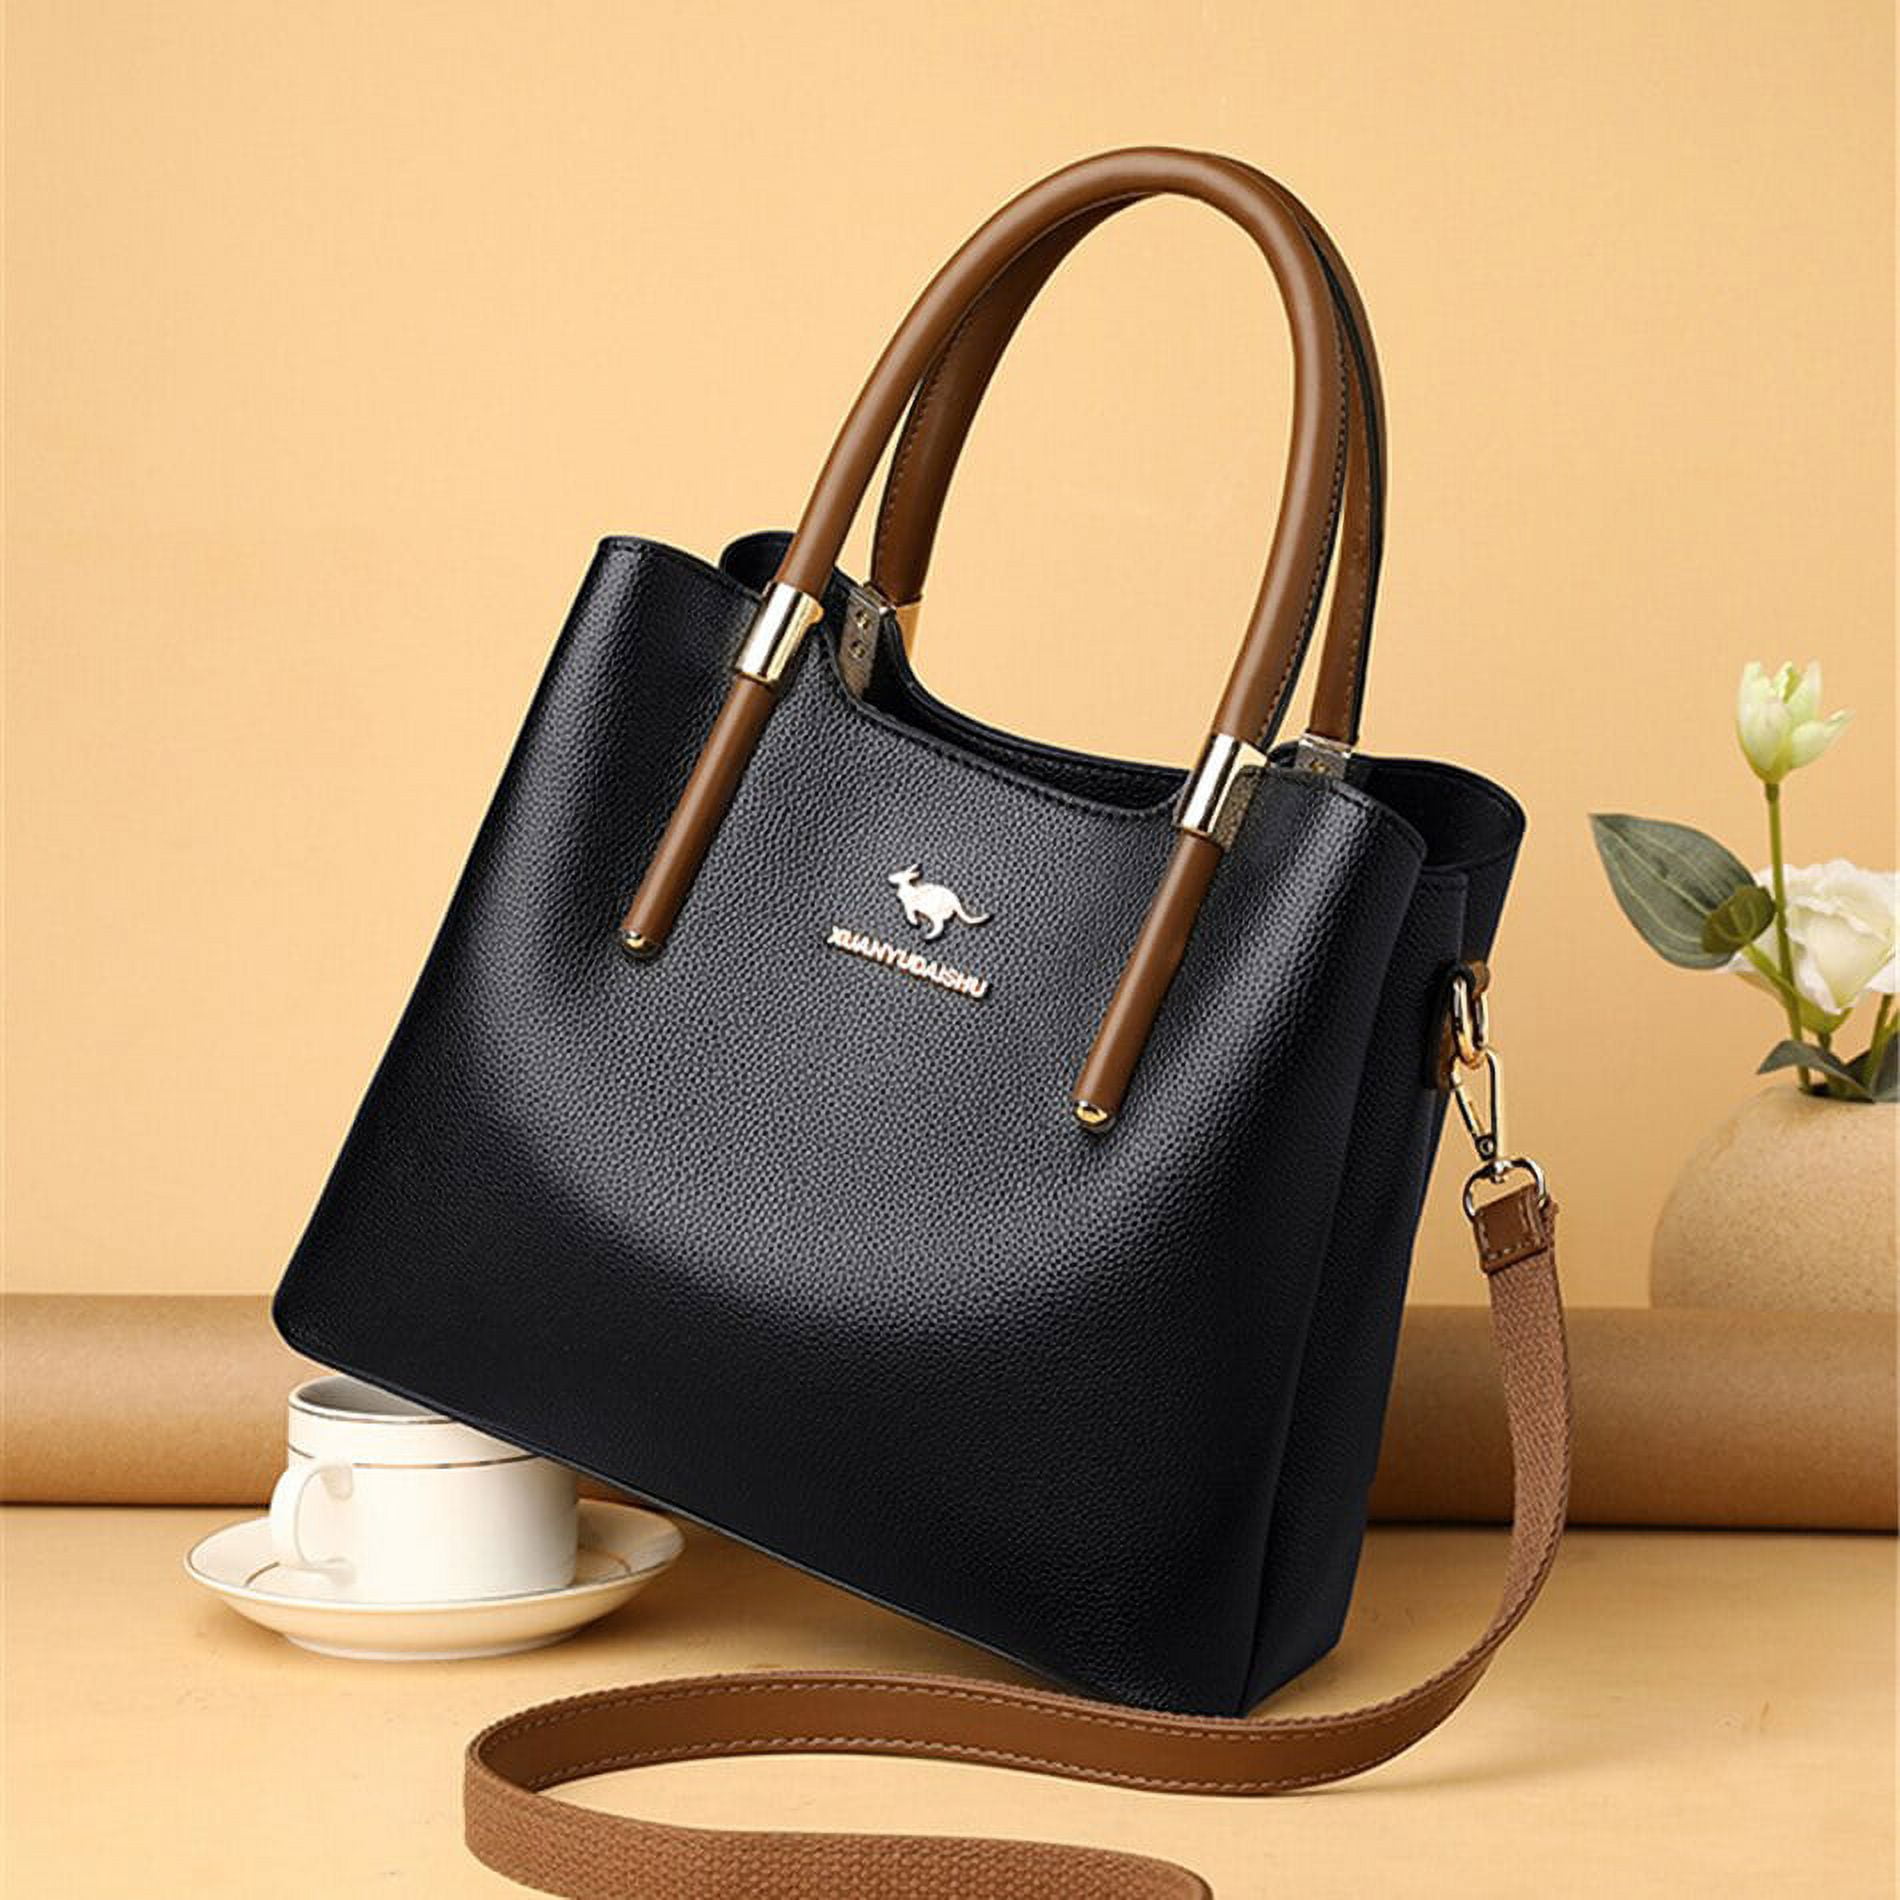 Designer Geometry Tote Bag 2022 For Women High Capacity Solid Color Handbag  With Oversized Capacity From Shluxurybag, $51.45 | DHgate.Com